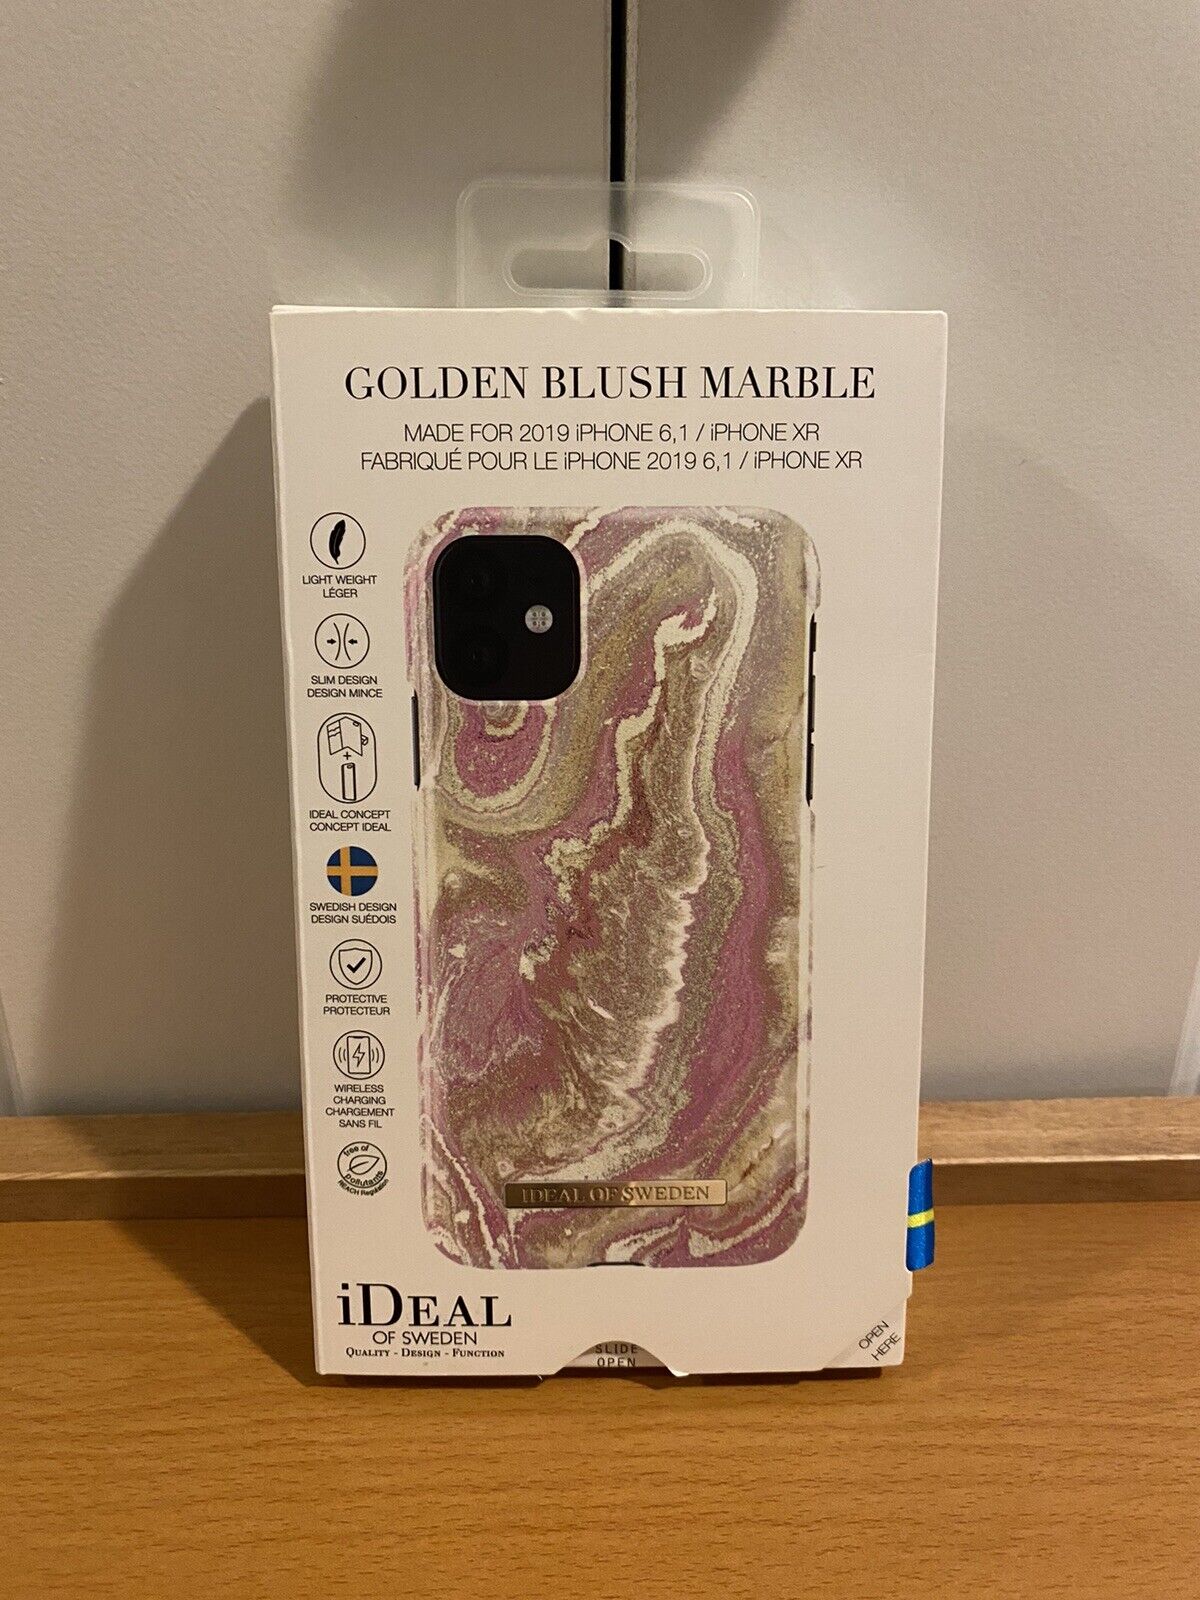 Ideal of Sweden Case Golden Blush Marble made for 2019 iPhone 6,1 / iPhone XR